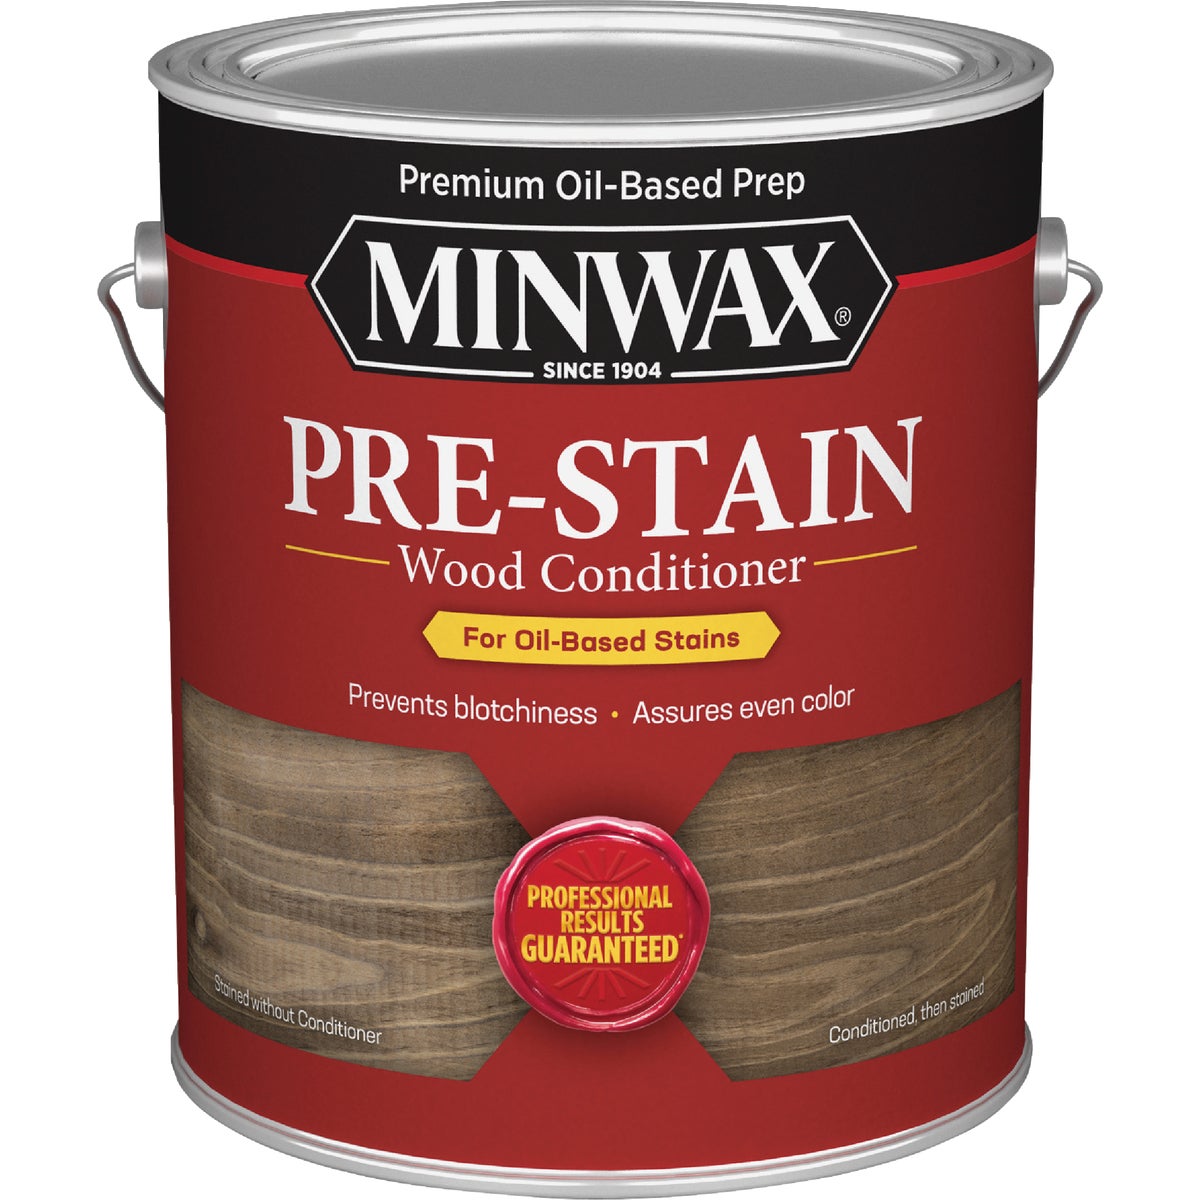 Minwax 1 Gal. Pre-Stain Wood Conditioner